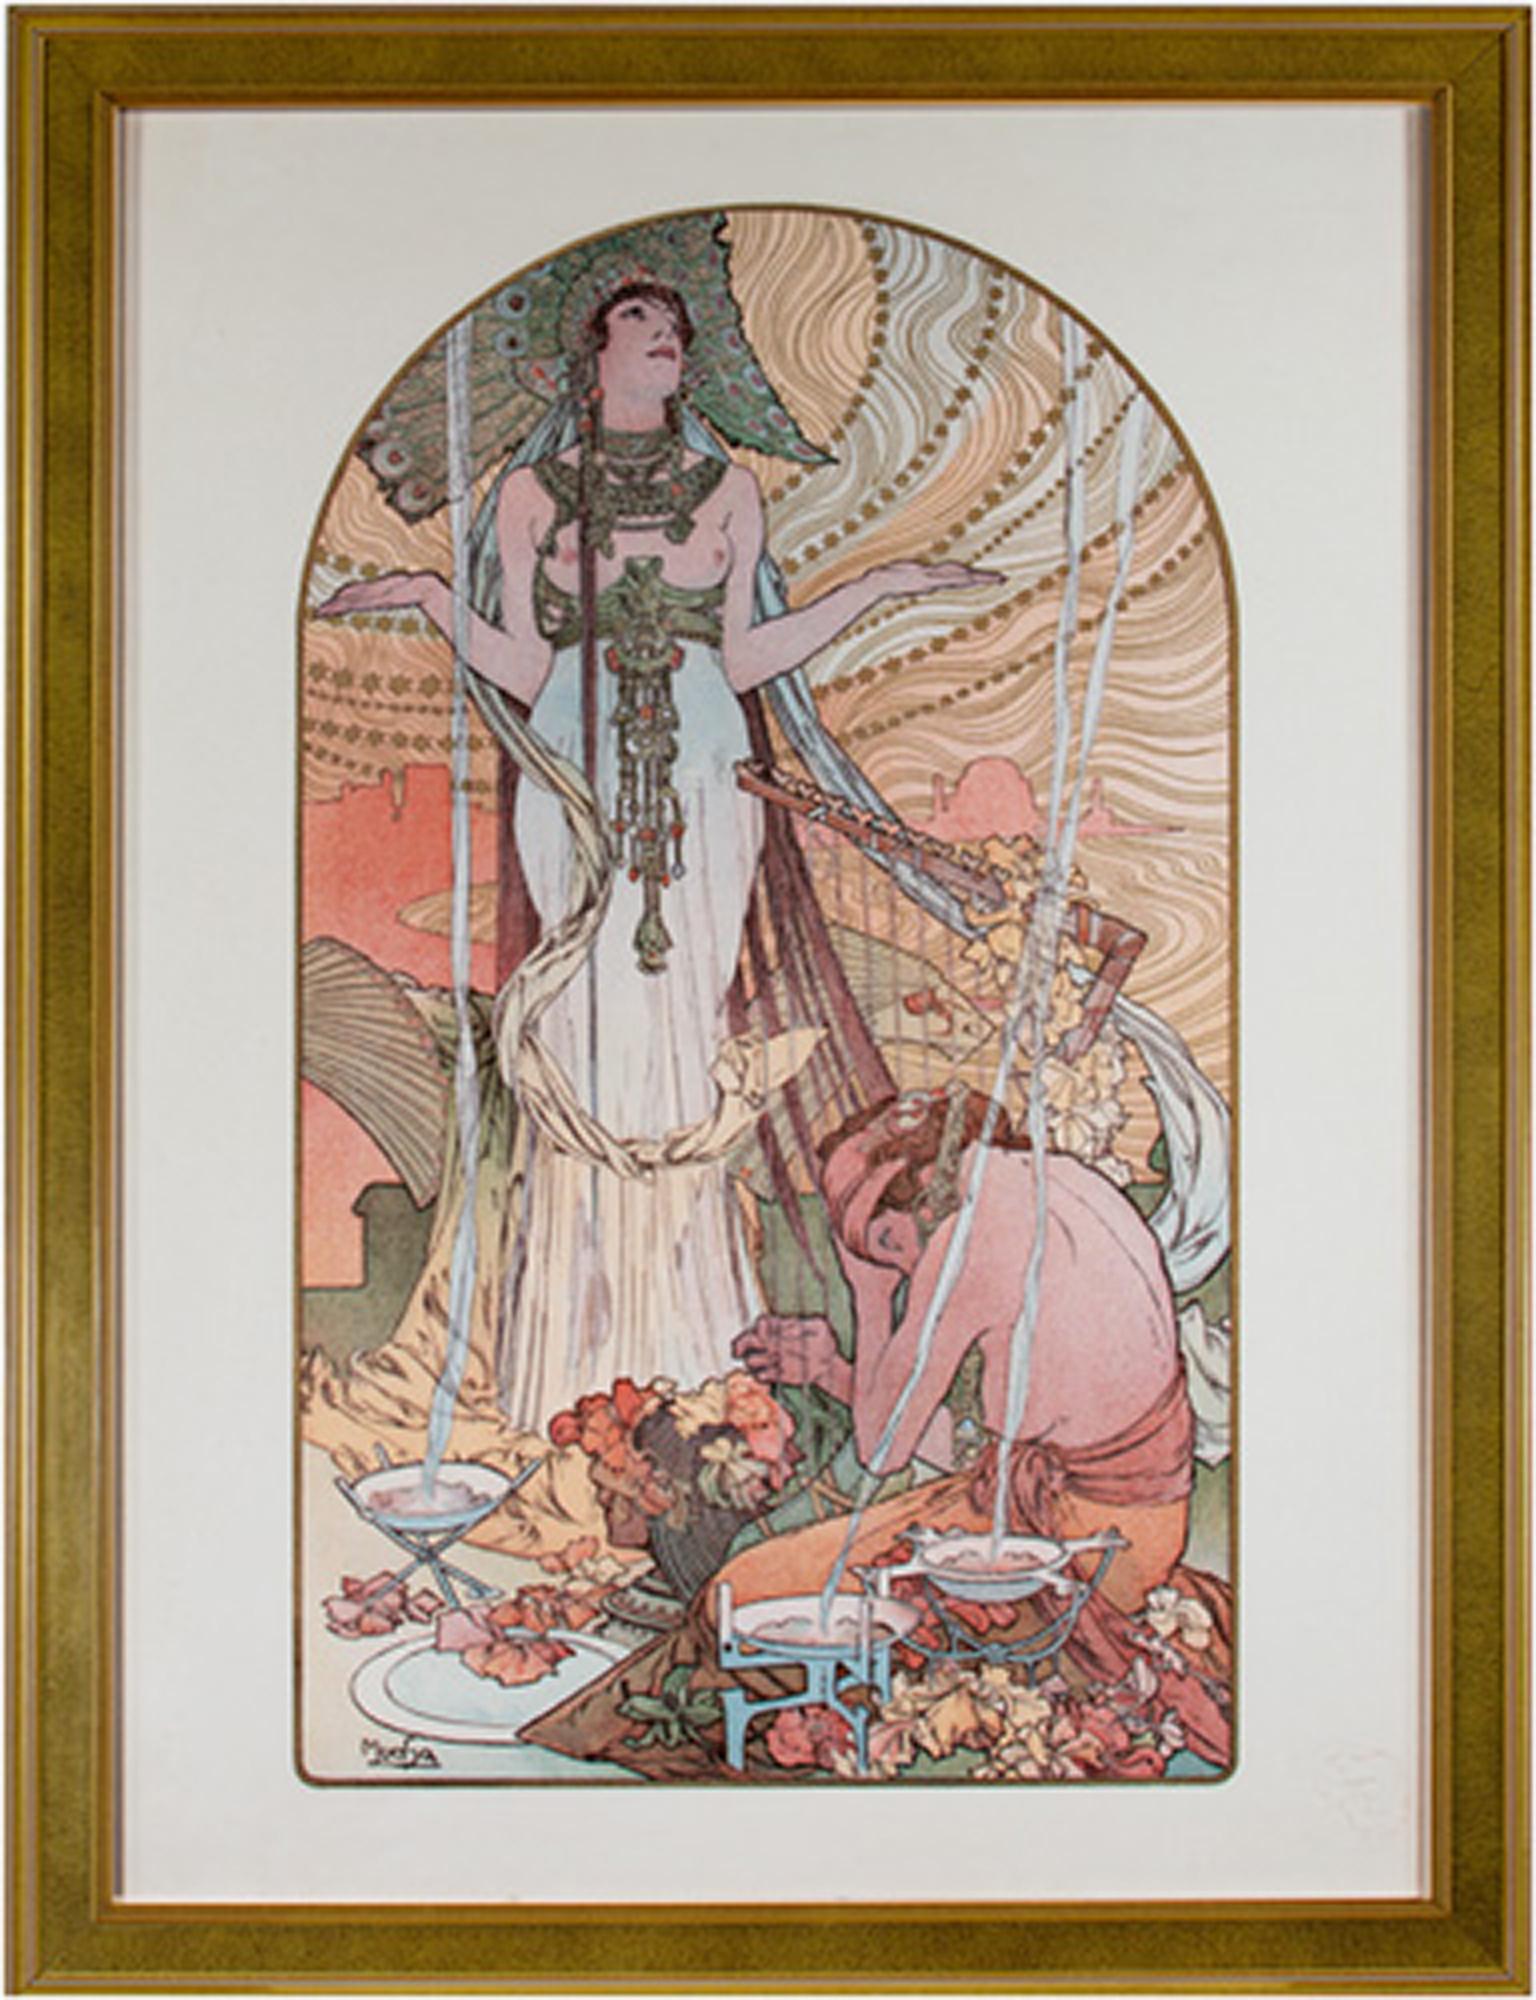 Incantation - L'Estampe Moderne, Giclee Print after 1897 Lithograph by Mucha - Beige Figurative Print by (after) Alphonse Mucha